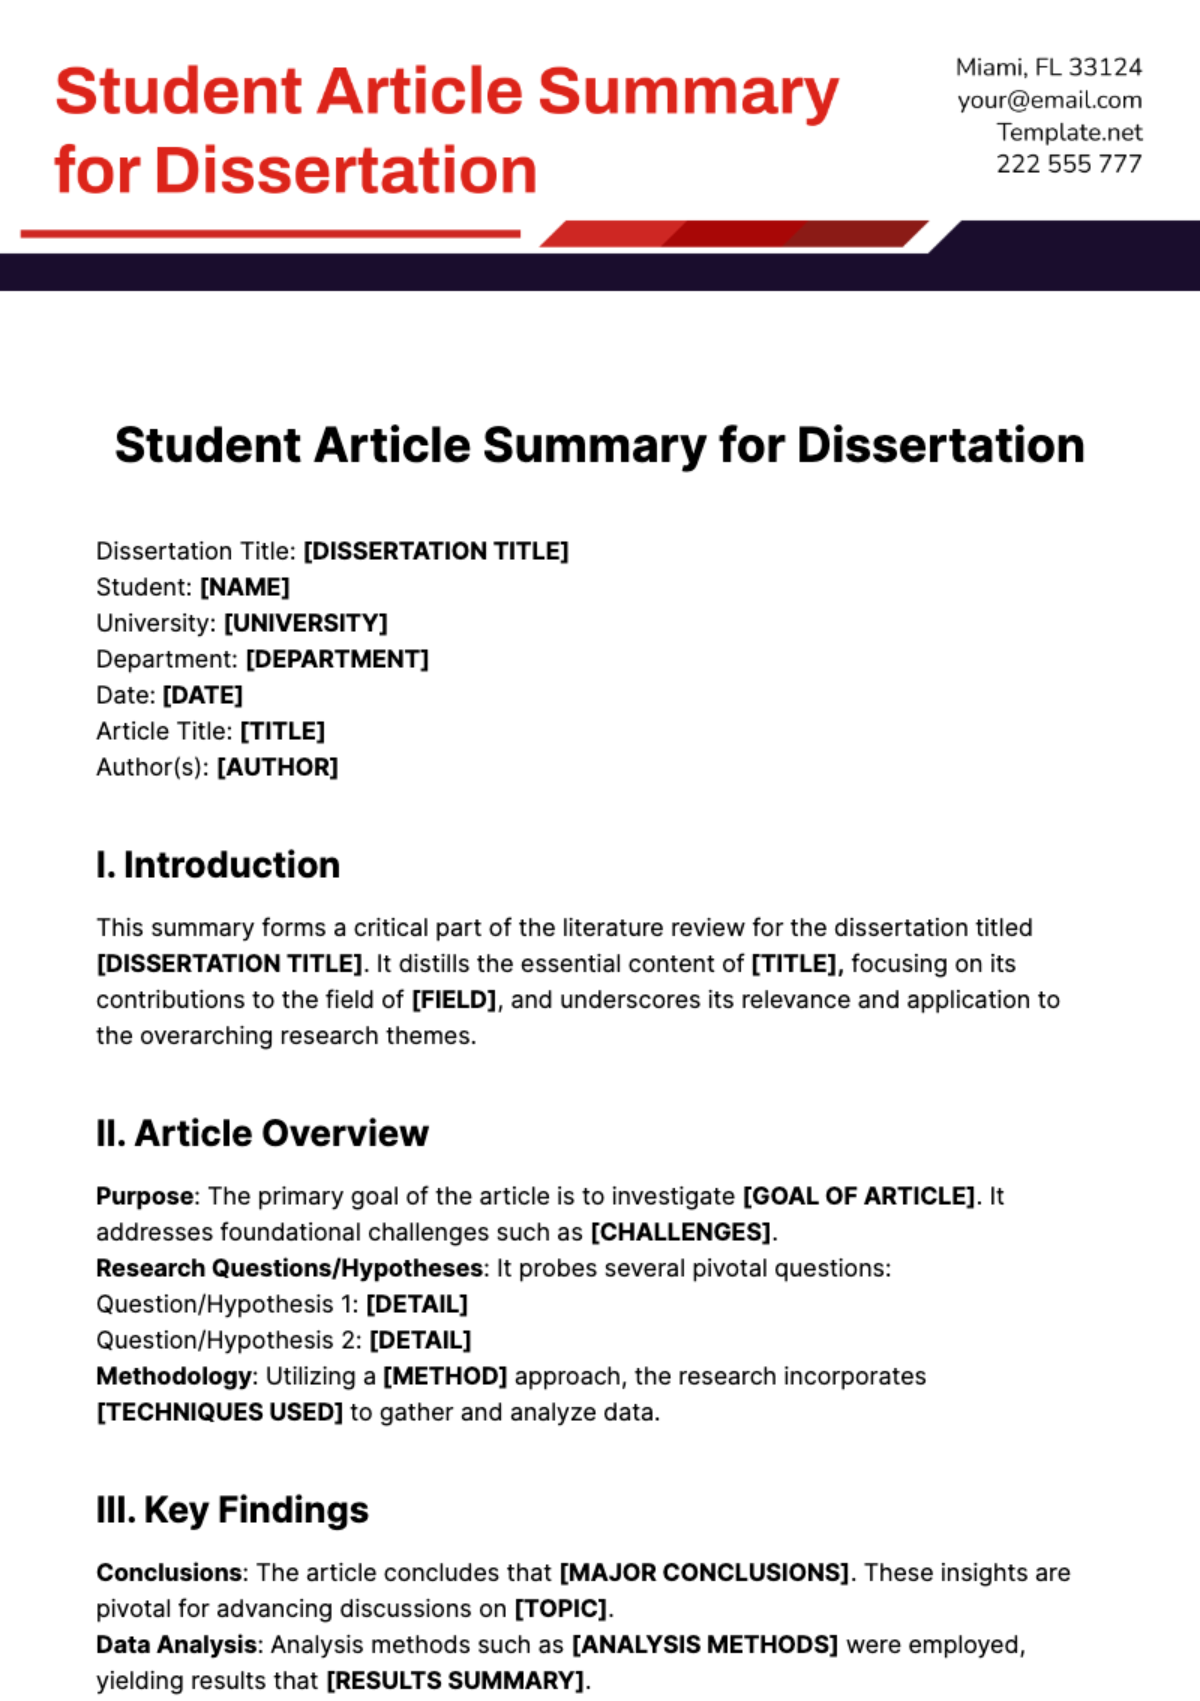 Free Student Article Summary for Dissertation Template